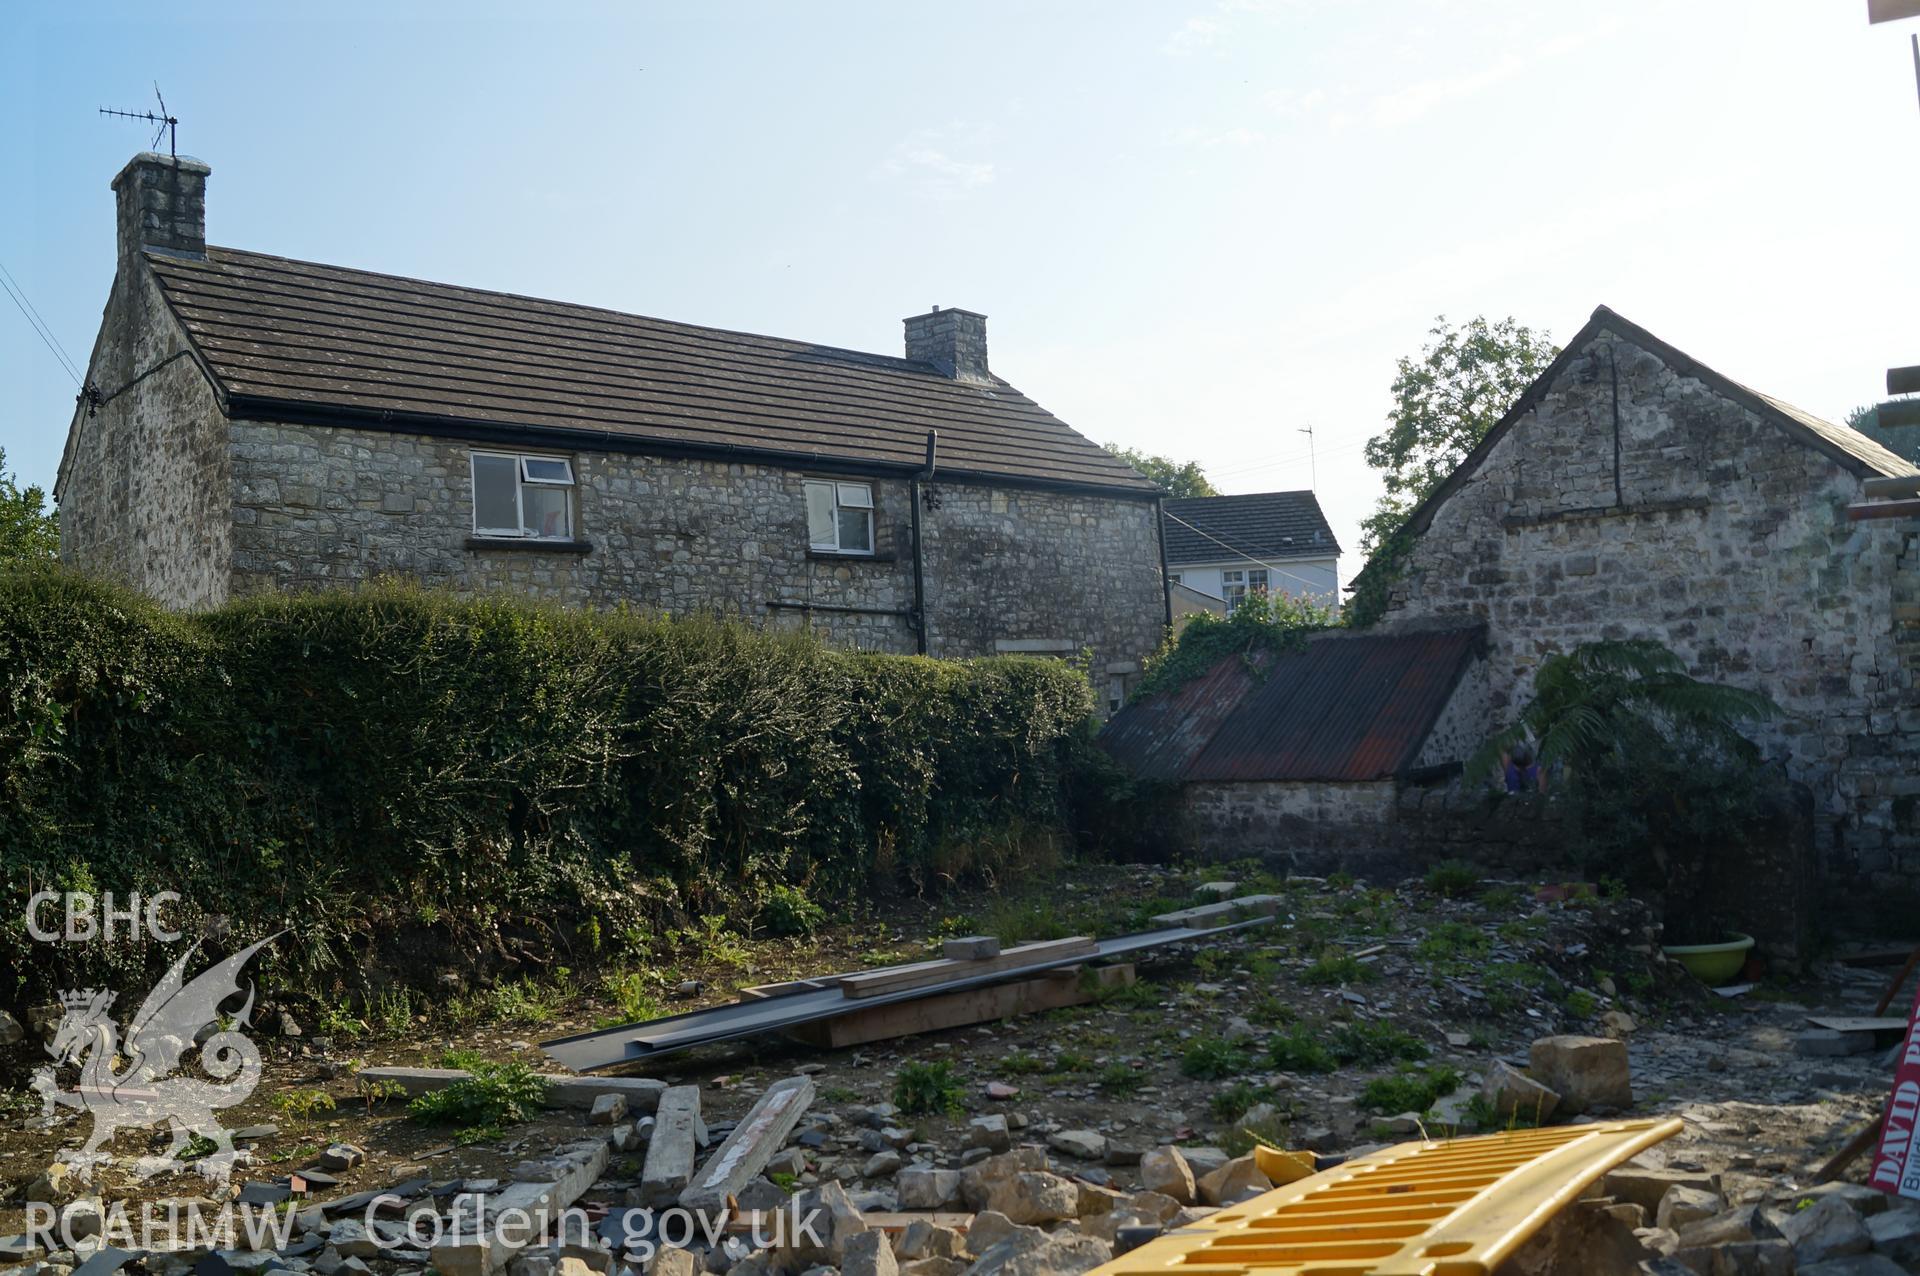 View 'looking south southwest at Rawley Court house with the barn to the right of the photograph' at Rowley Court, Llantwit Major. Photograph & description by Jenny Hall & Paul Sambrook of Trysor, 7th September 2016.